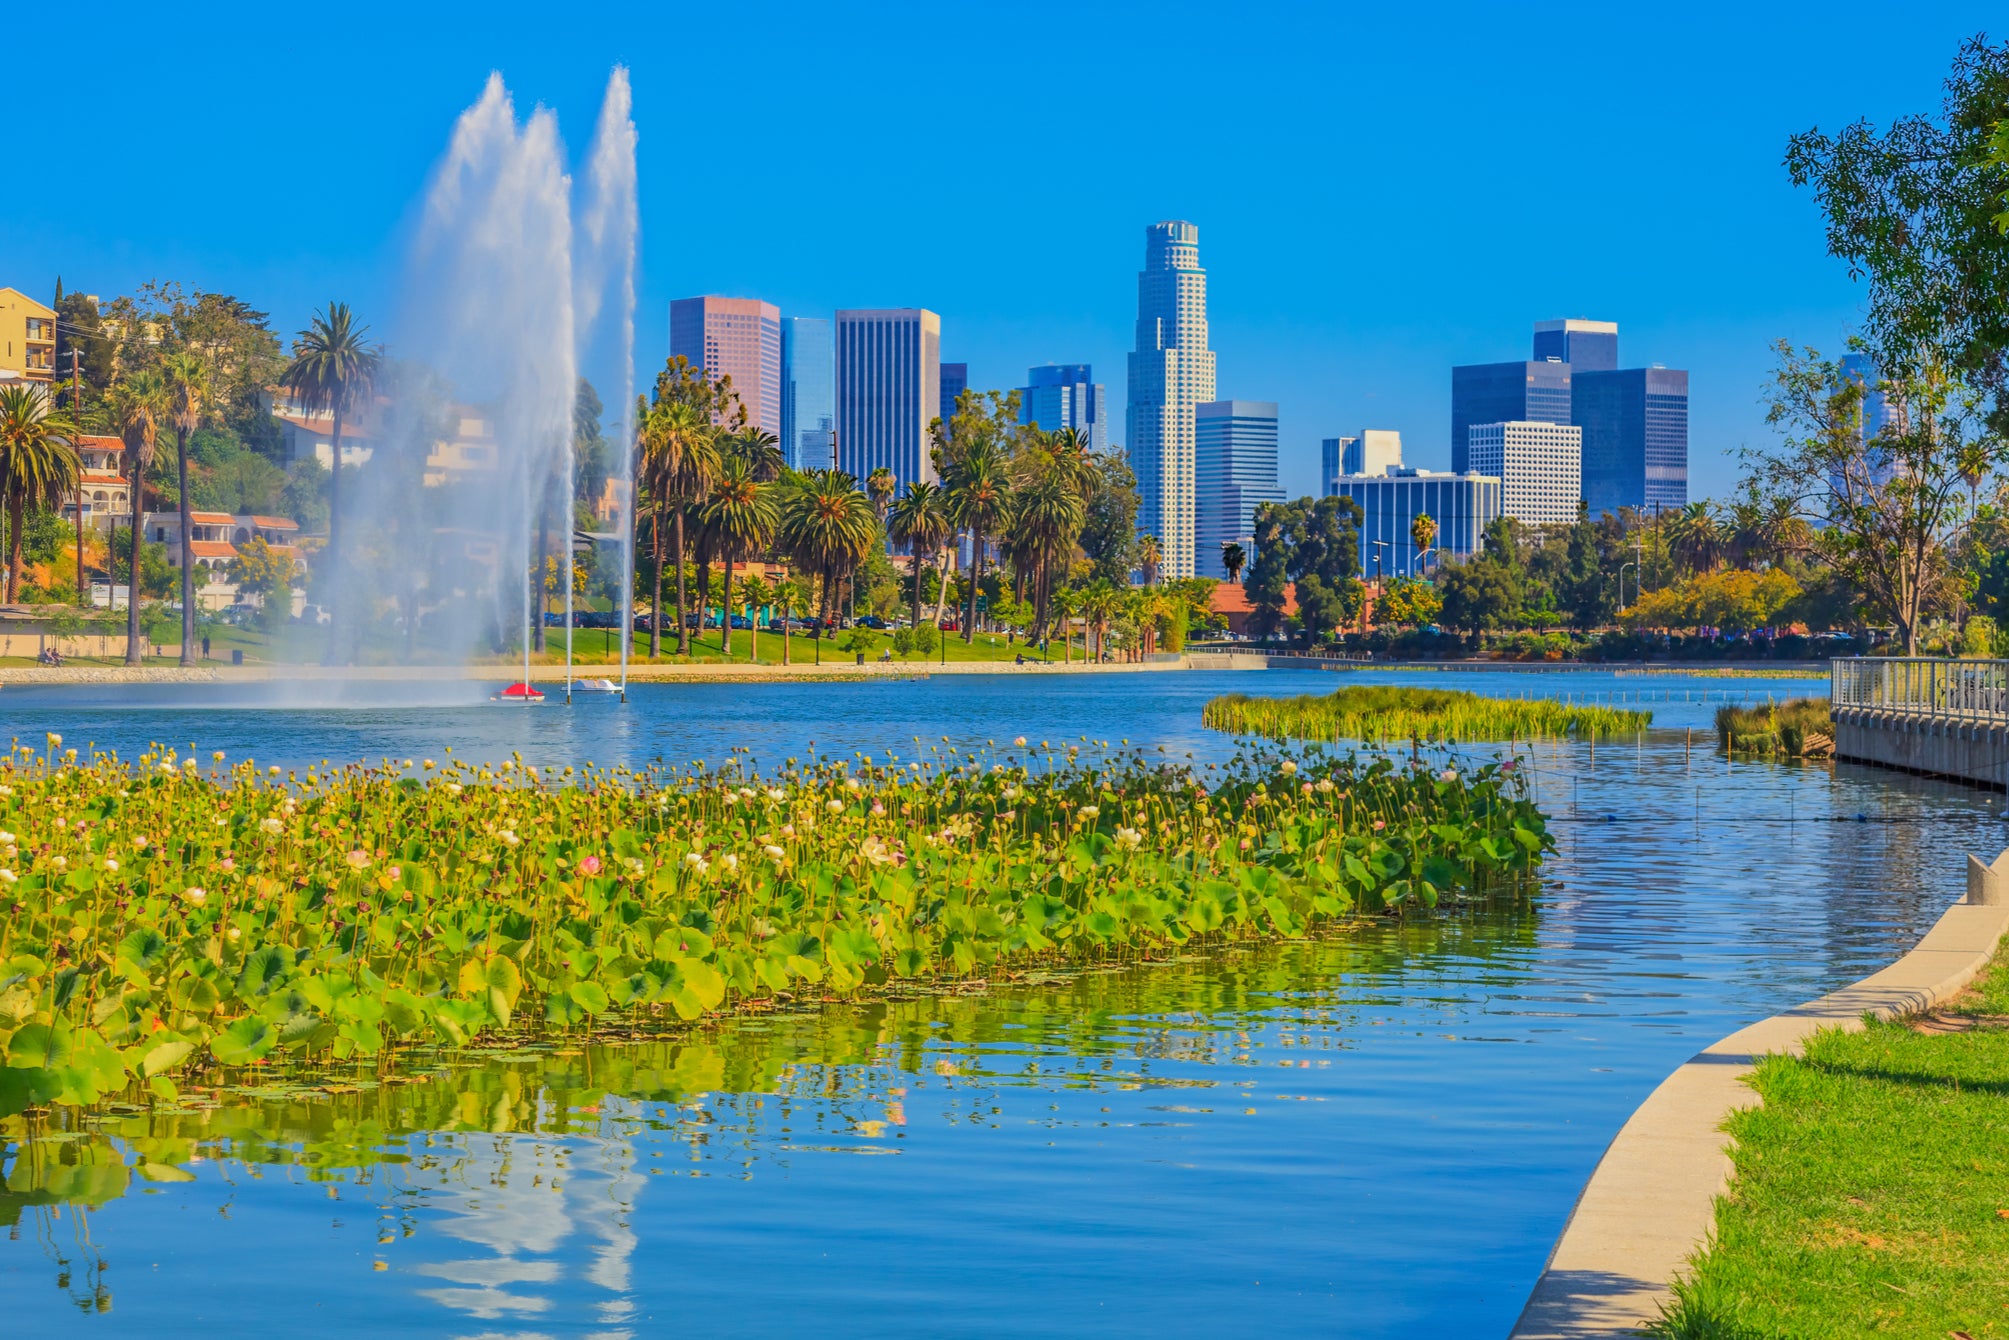 California dreaming: Visit LA without breaking the bank